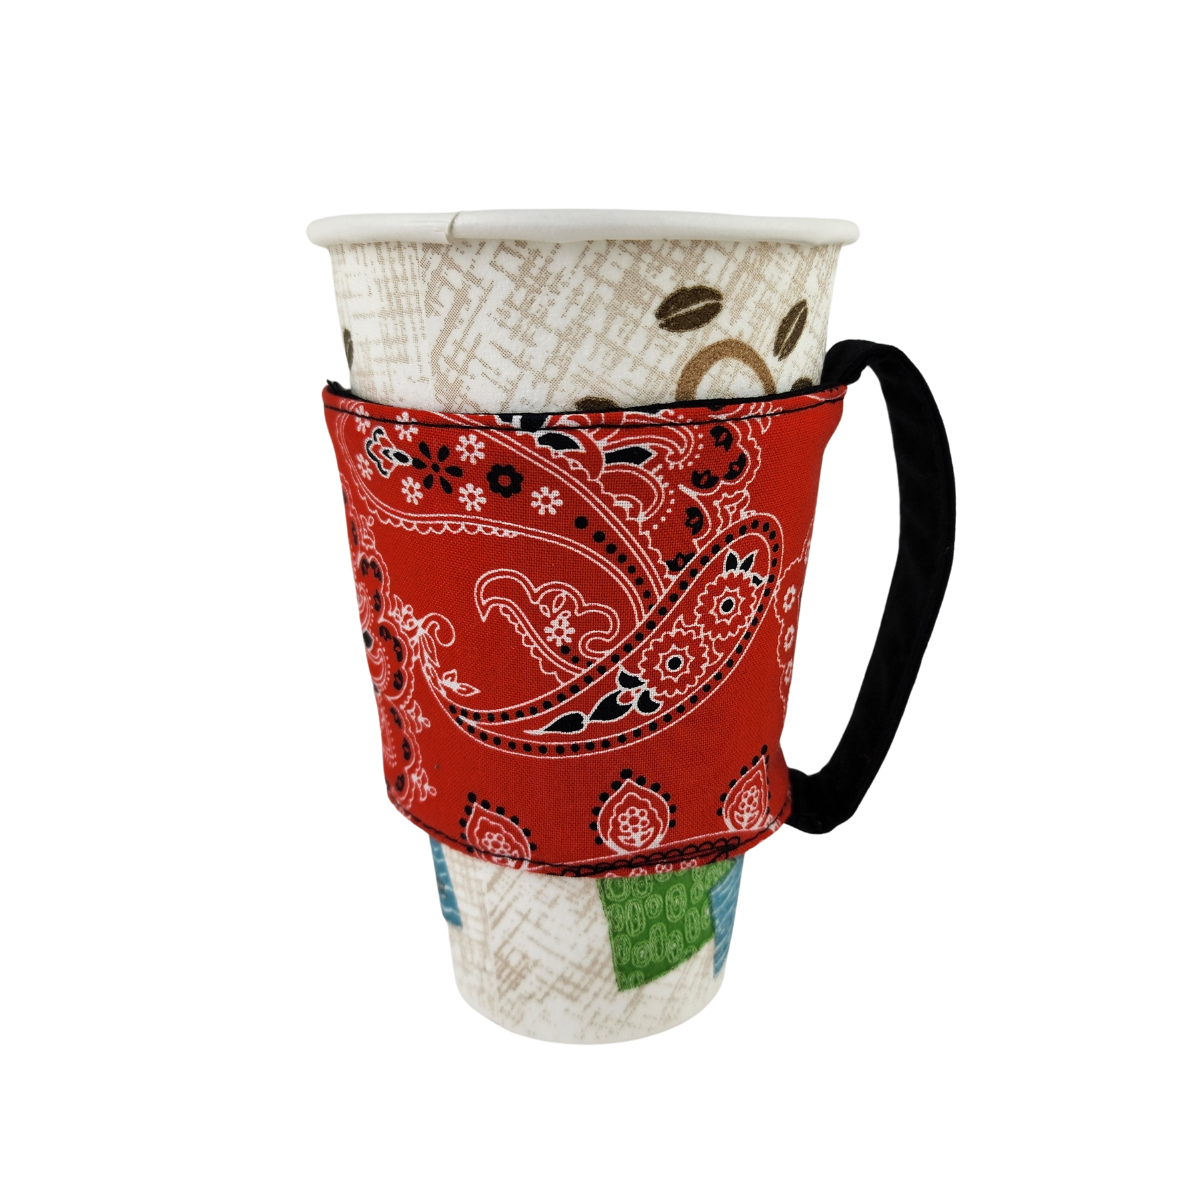 https://www.martellinotions.com/mm5/graphics/00000001/2/cup%20cozy%20handle.png